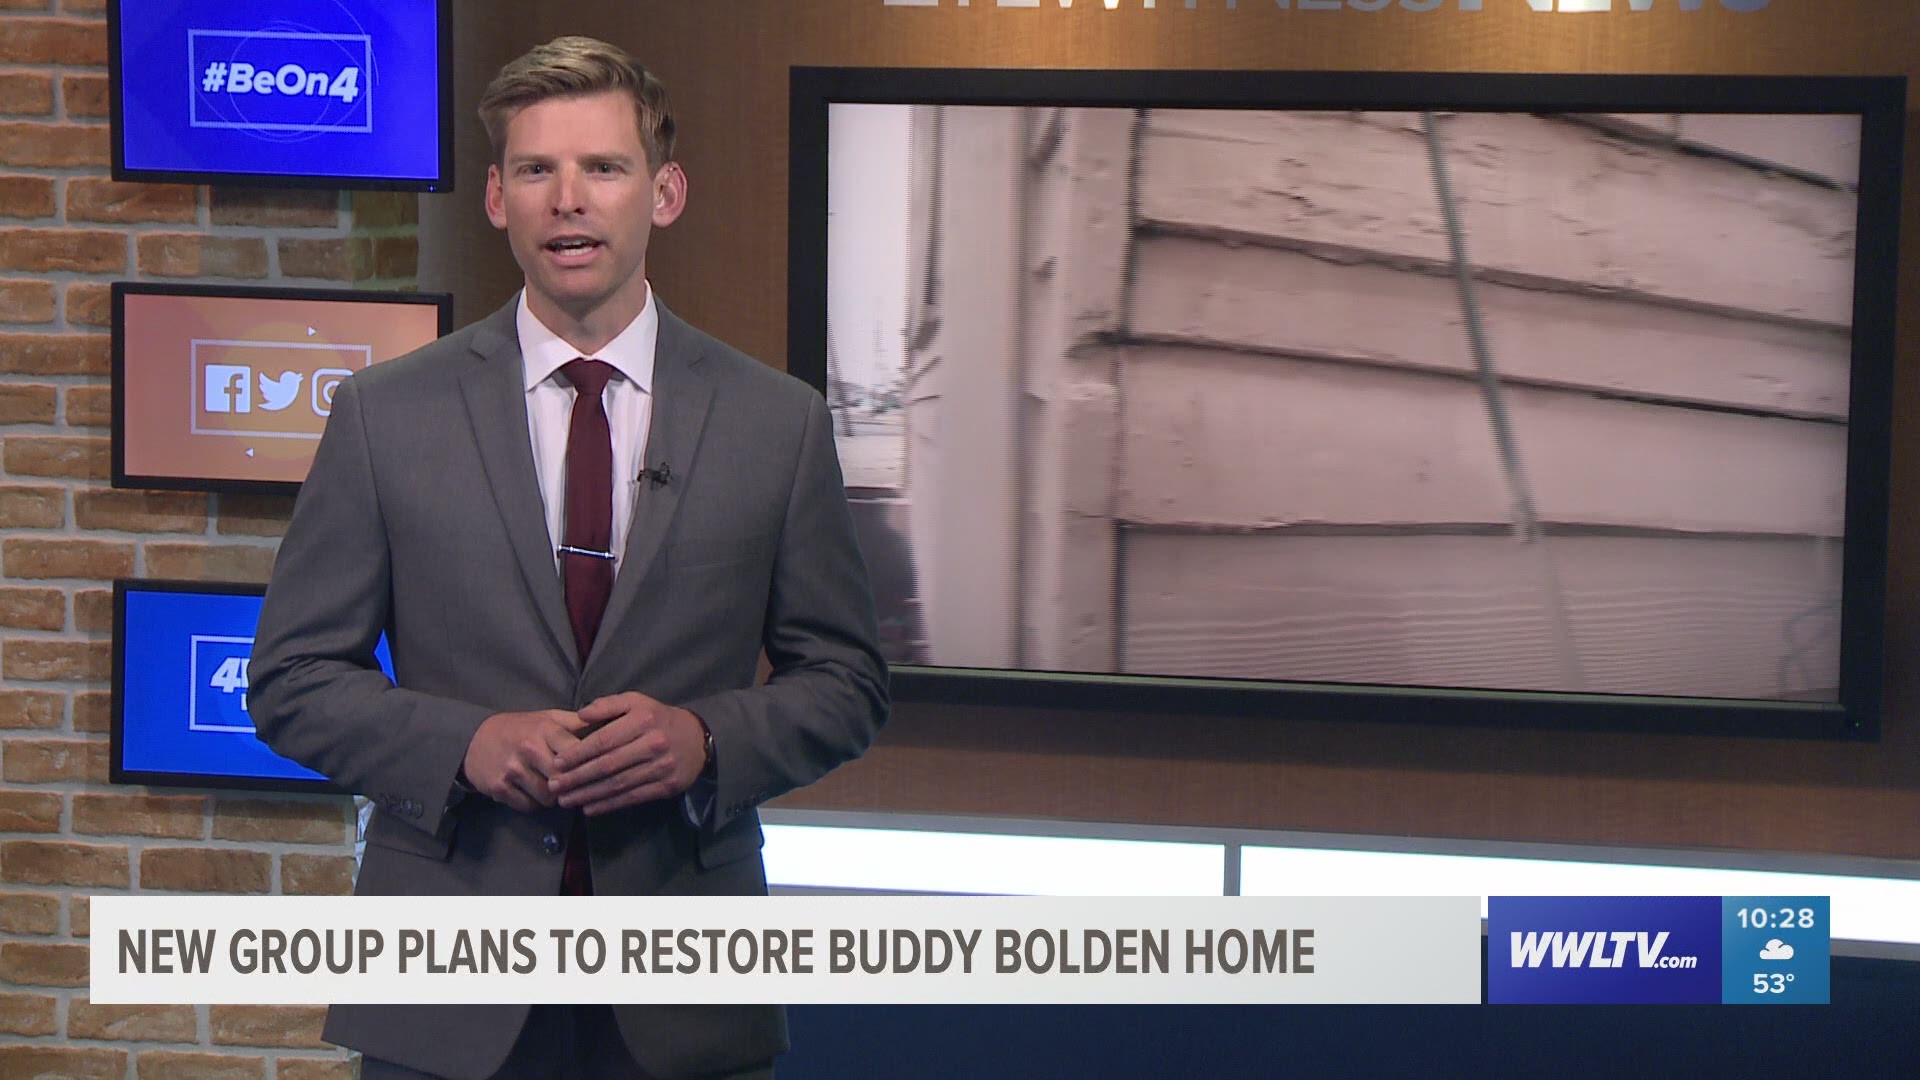 Buddy Bolden’s home has been crumbling for years, but a big name is stepping in to try to help save the dilapidated shotgun double